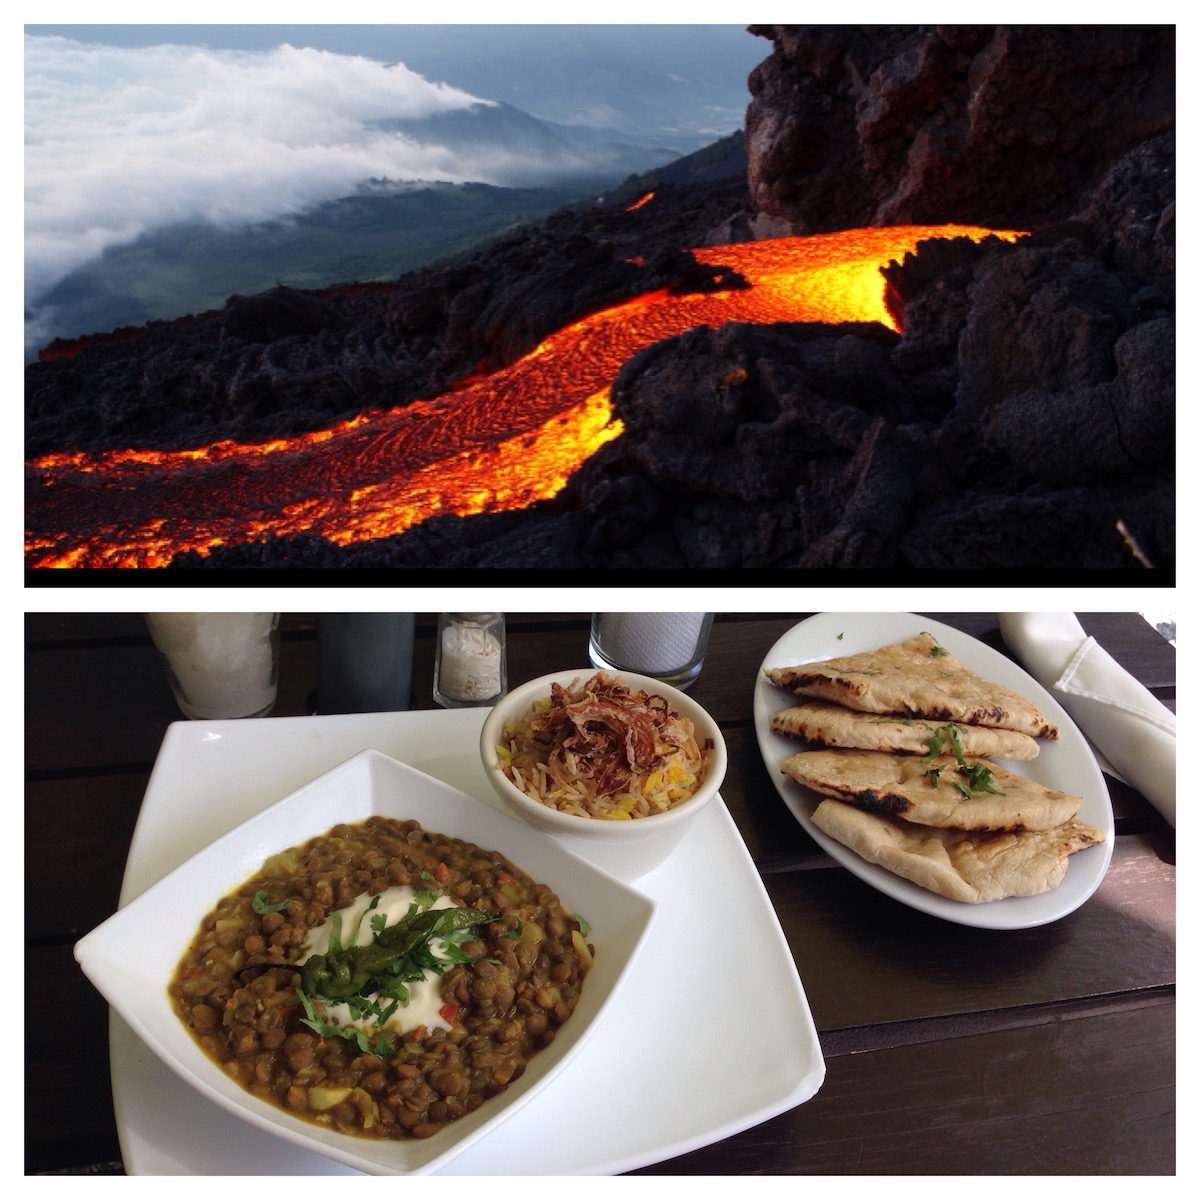 Indian food and a picture of an active volcano